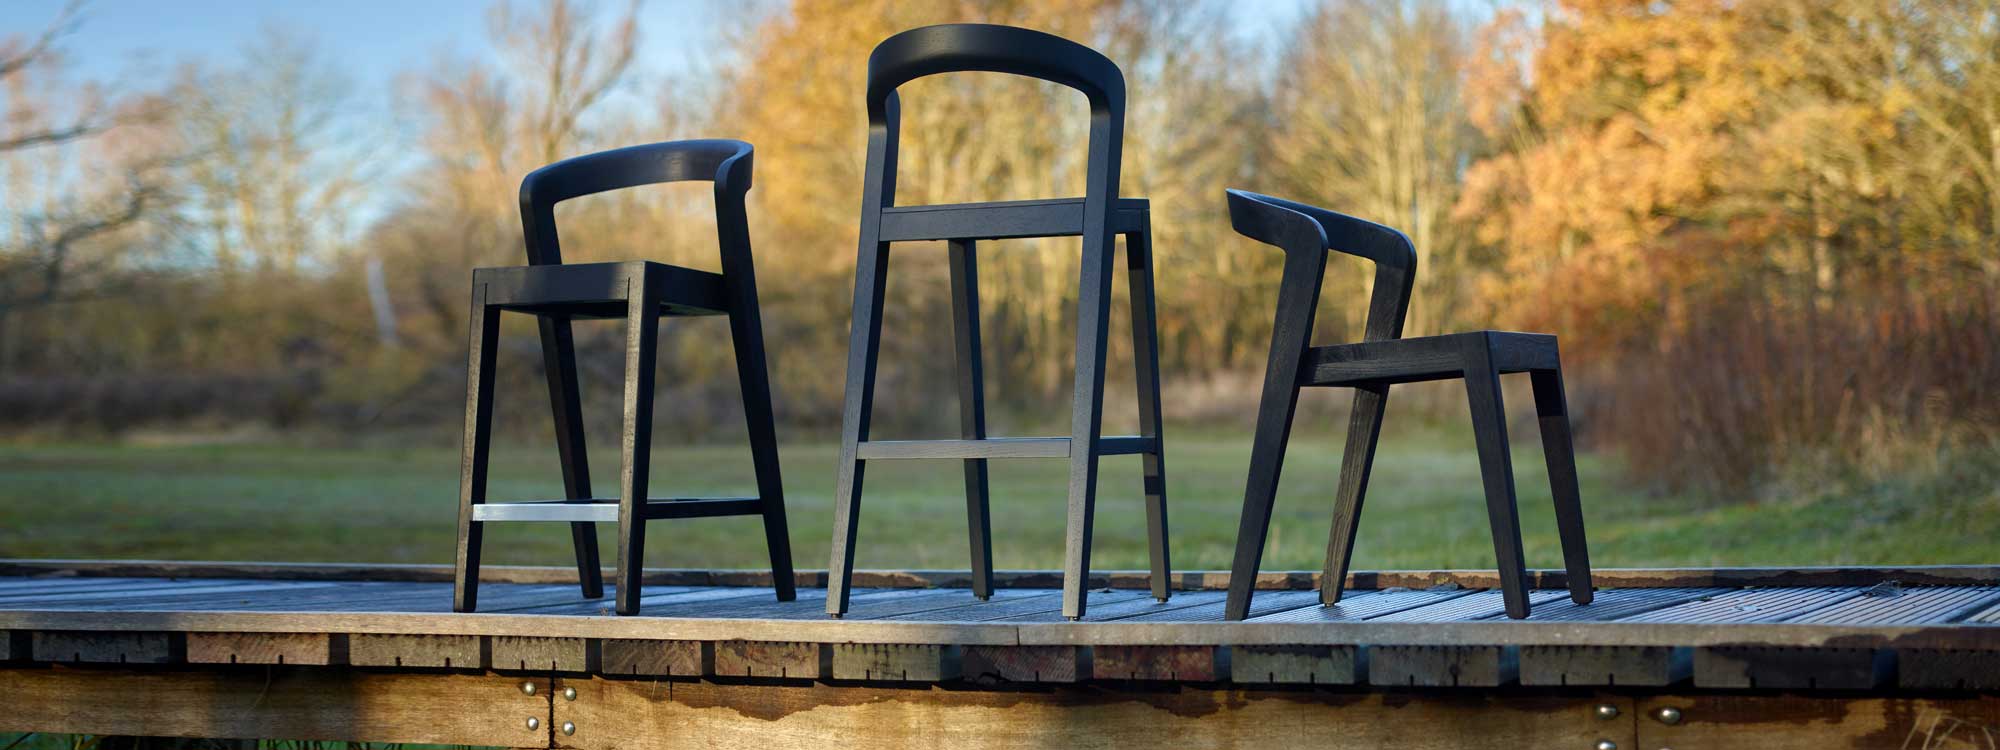 Play teak bar chairs are designed by Alain Berteau and are also available in a Black stained finish